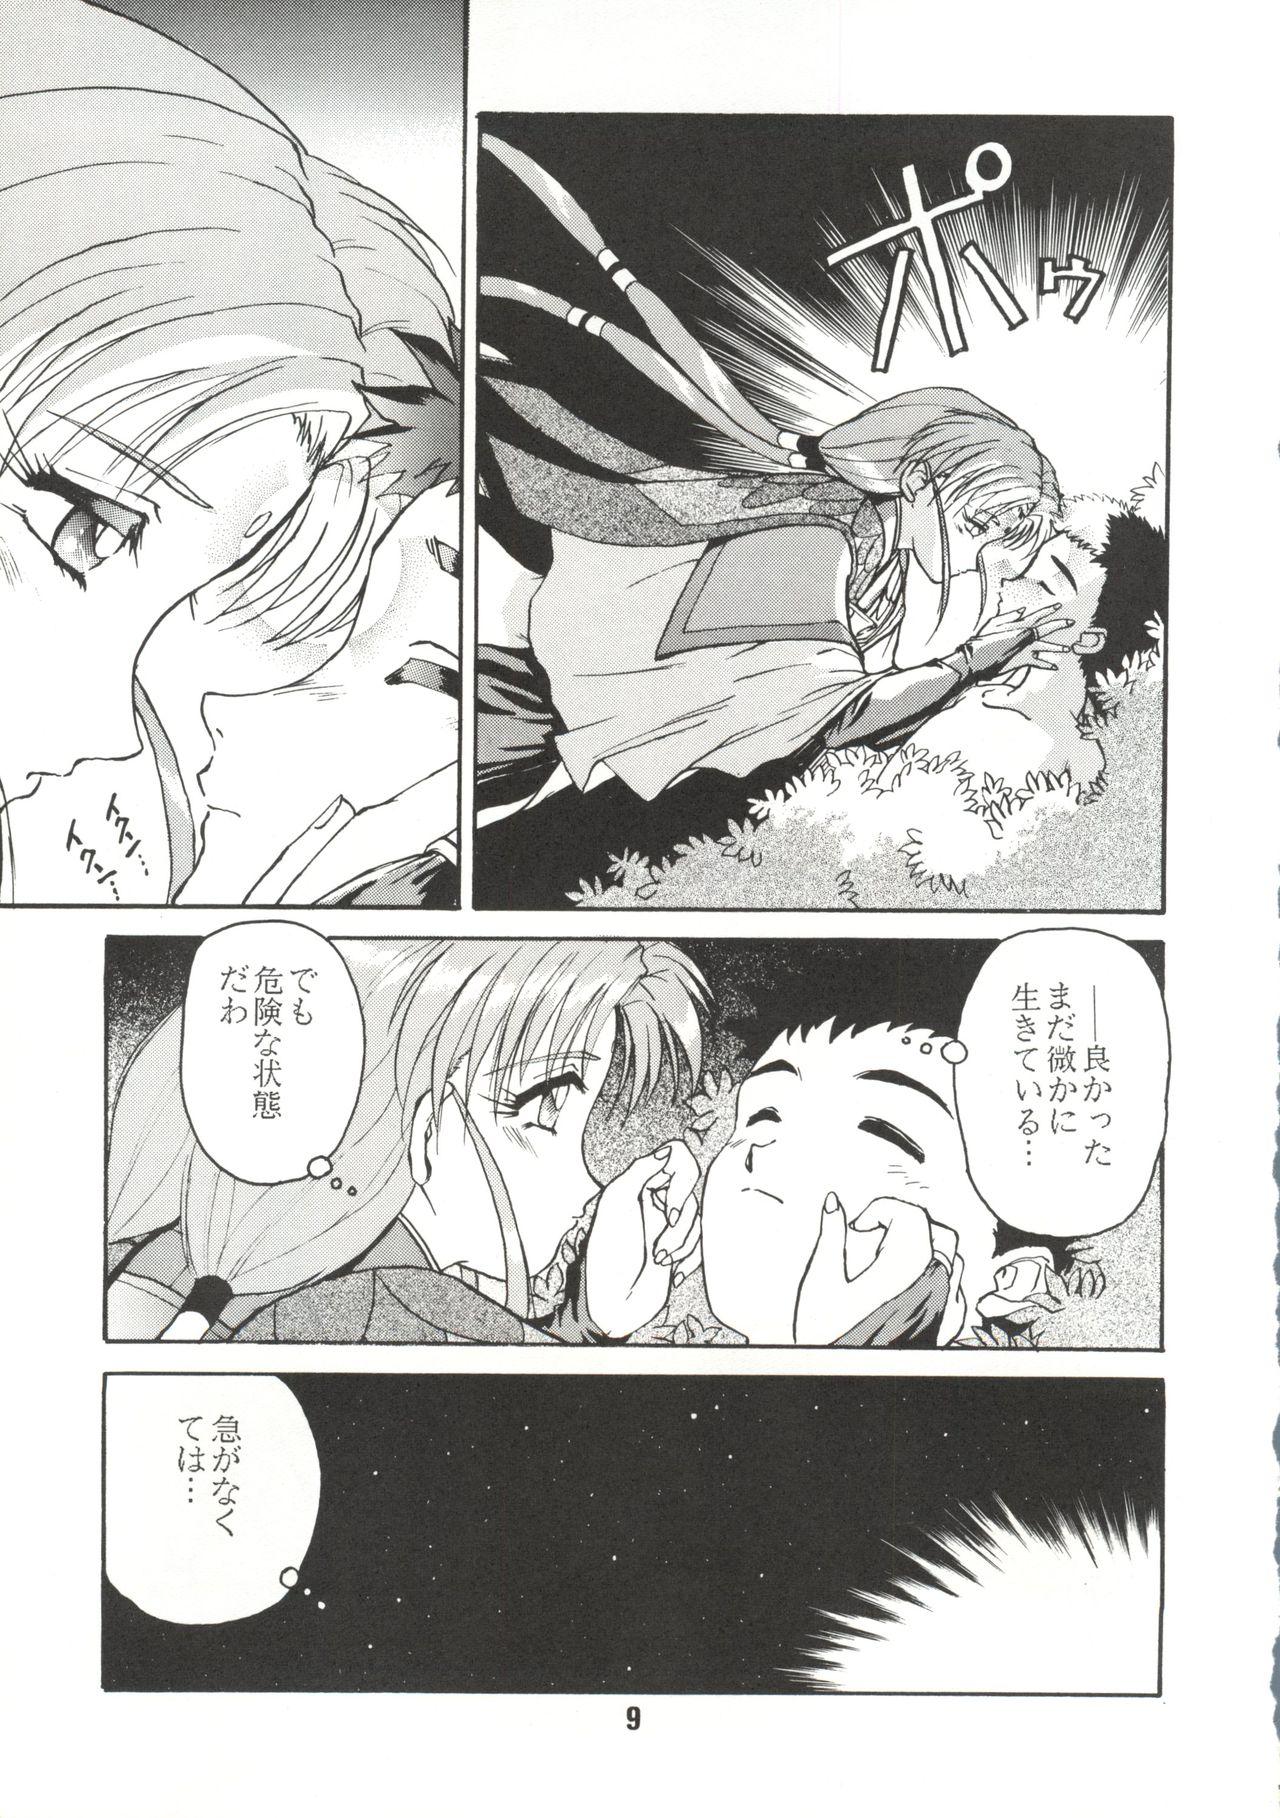 Mofos Do Not Turn Over! Revised Edition - Tenchi muyo Romantic - Page 8